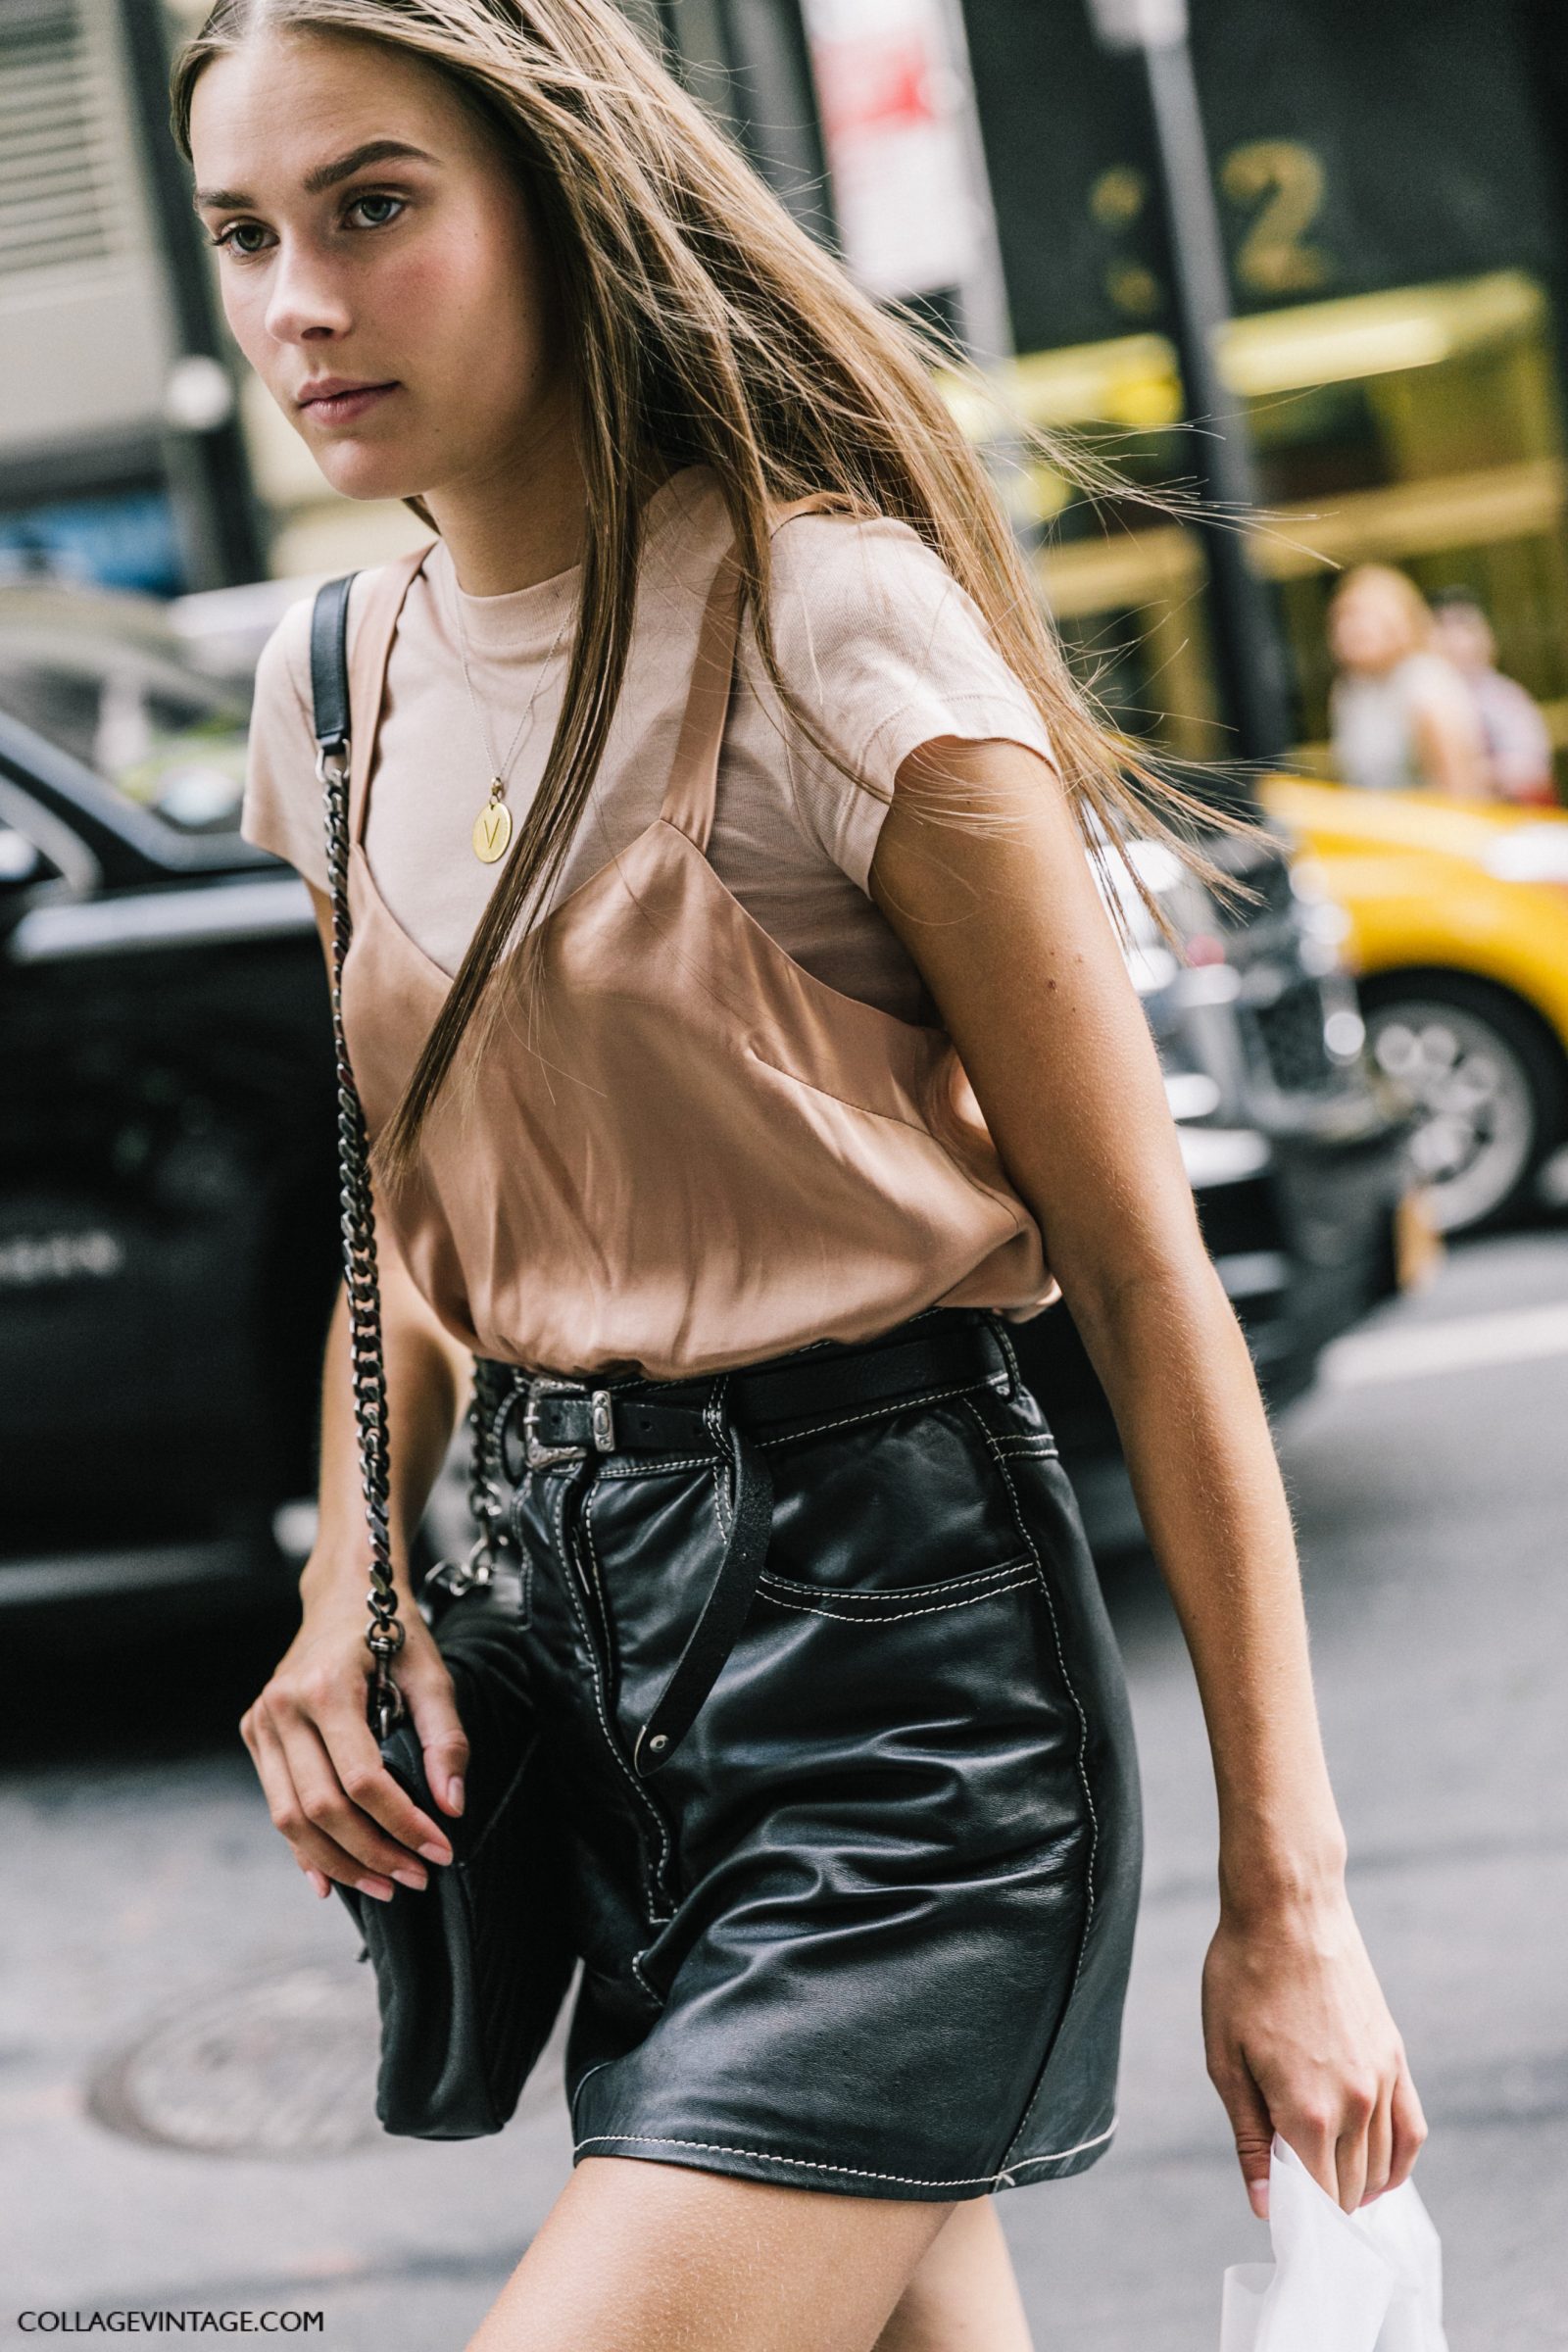 nyfw-new_york_fashion_week_ss17-street_style-outfits-collage_vintage-vintage-victoria_beckham-40